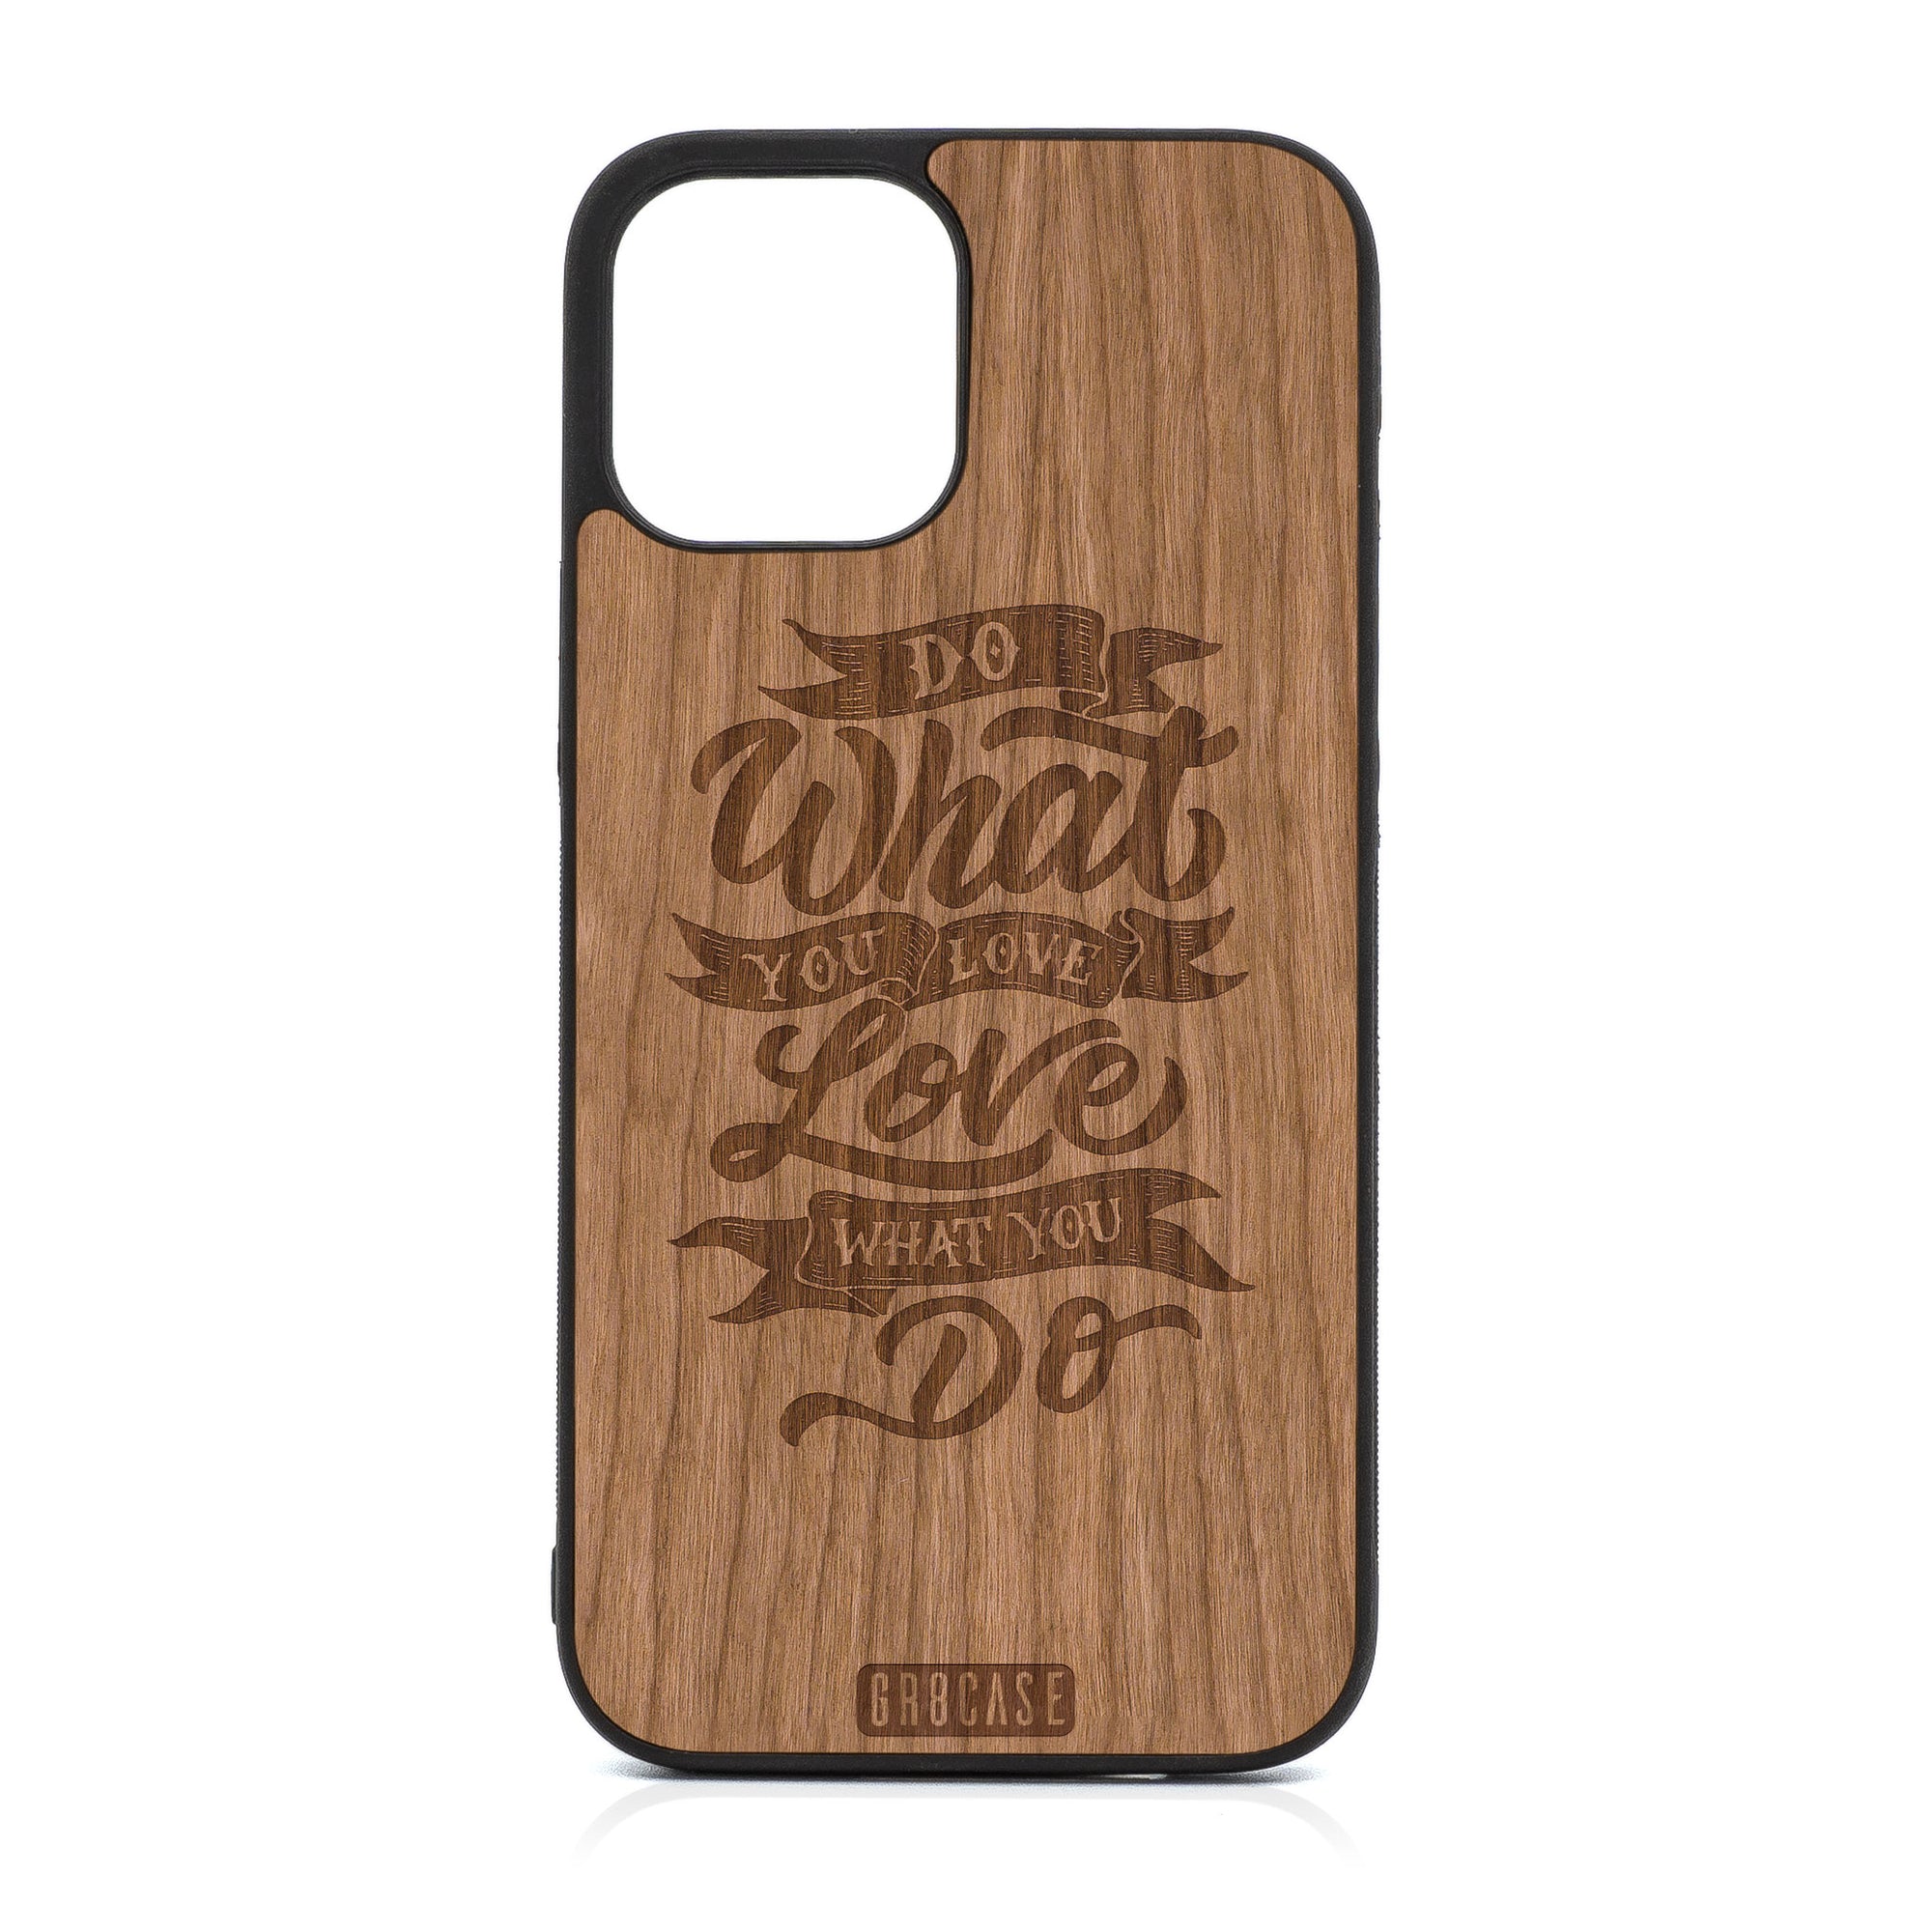 Do What You Love Love What You Do Design Wood Case For iPhone 12 Pro Max